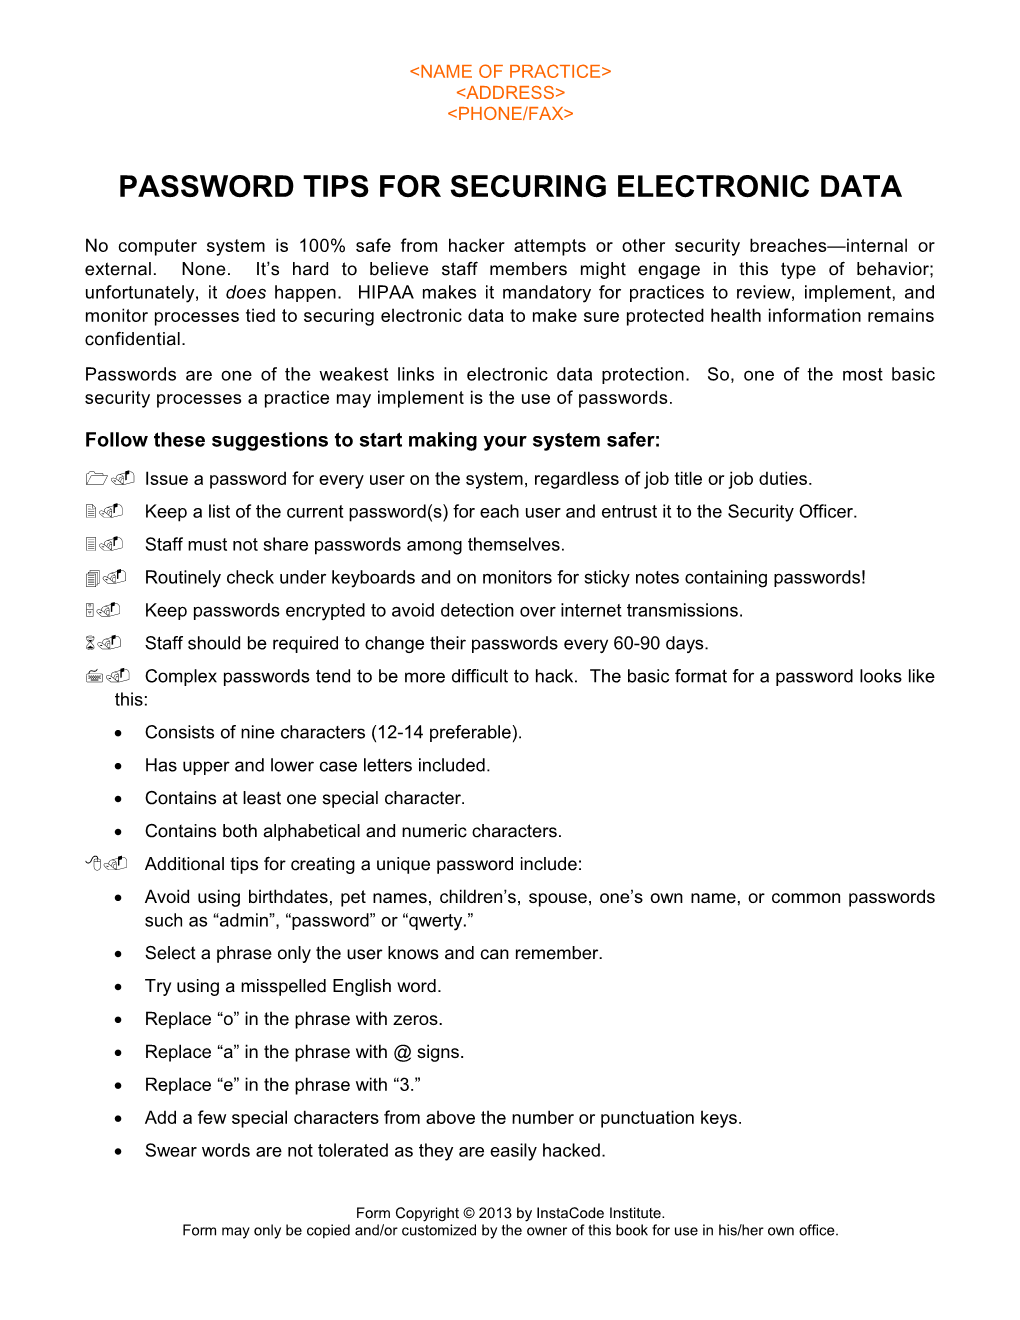 Password Tips for Securing Electronic Data